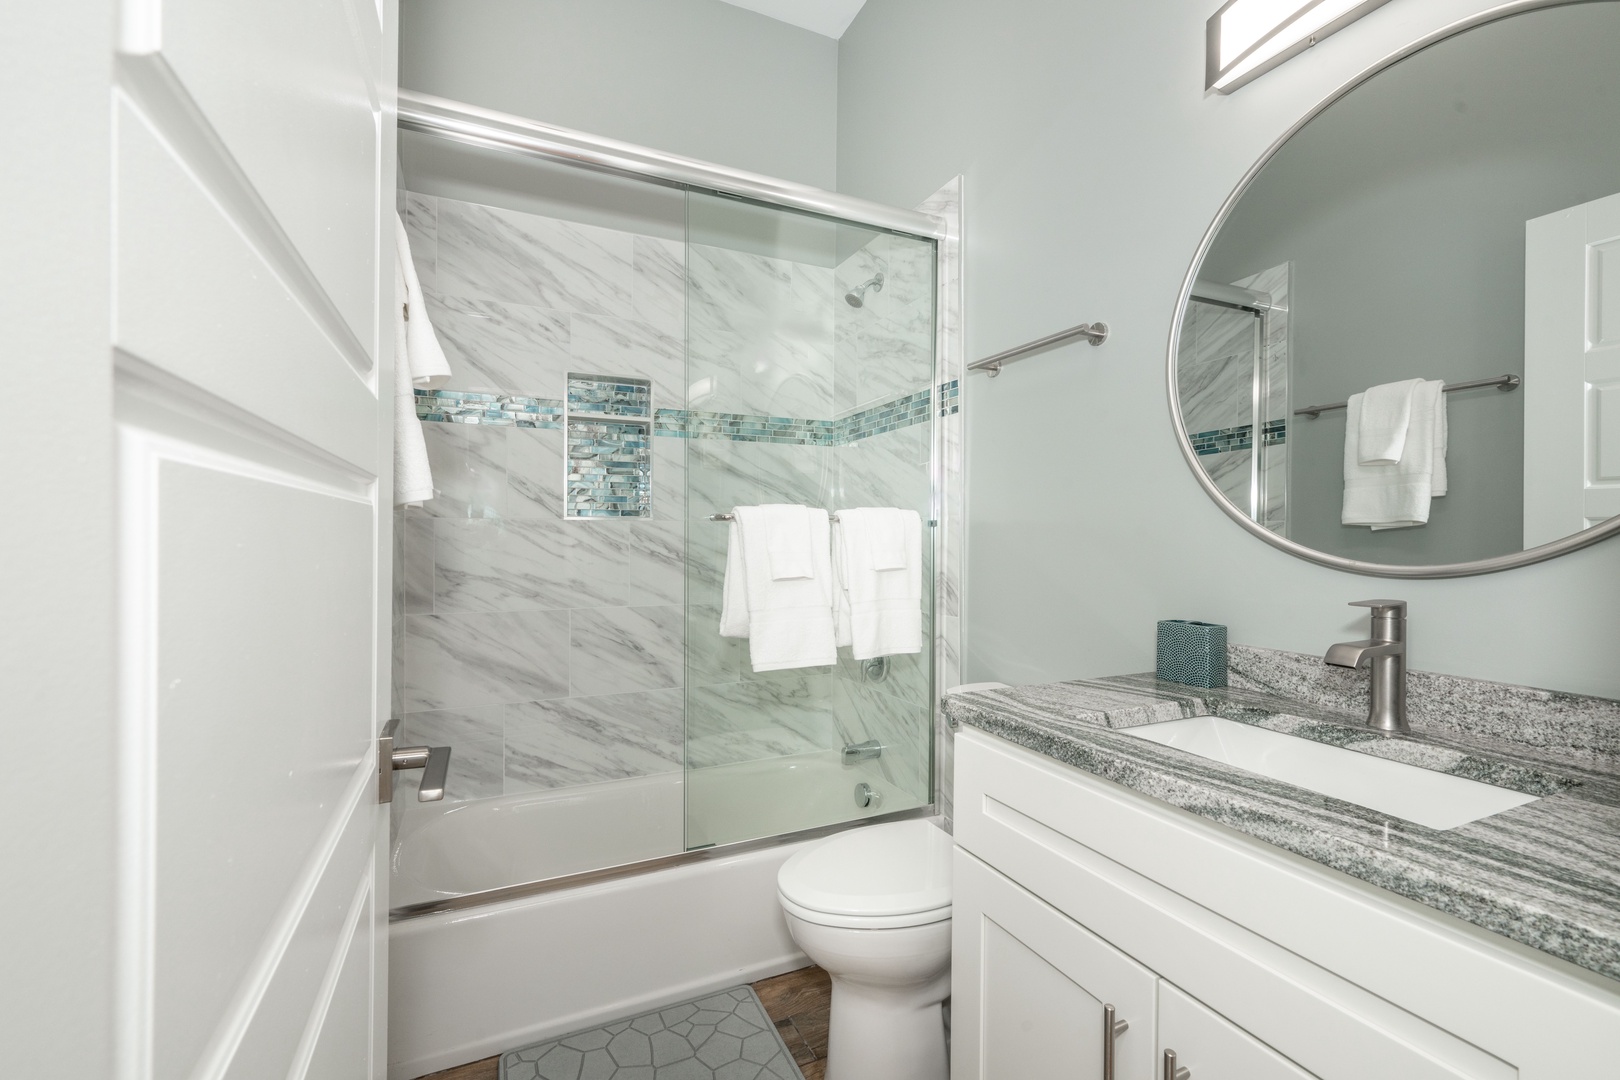 This ensuite bath features a single vanity & glass shower